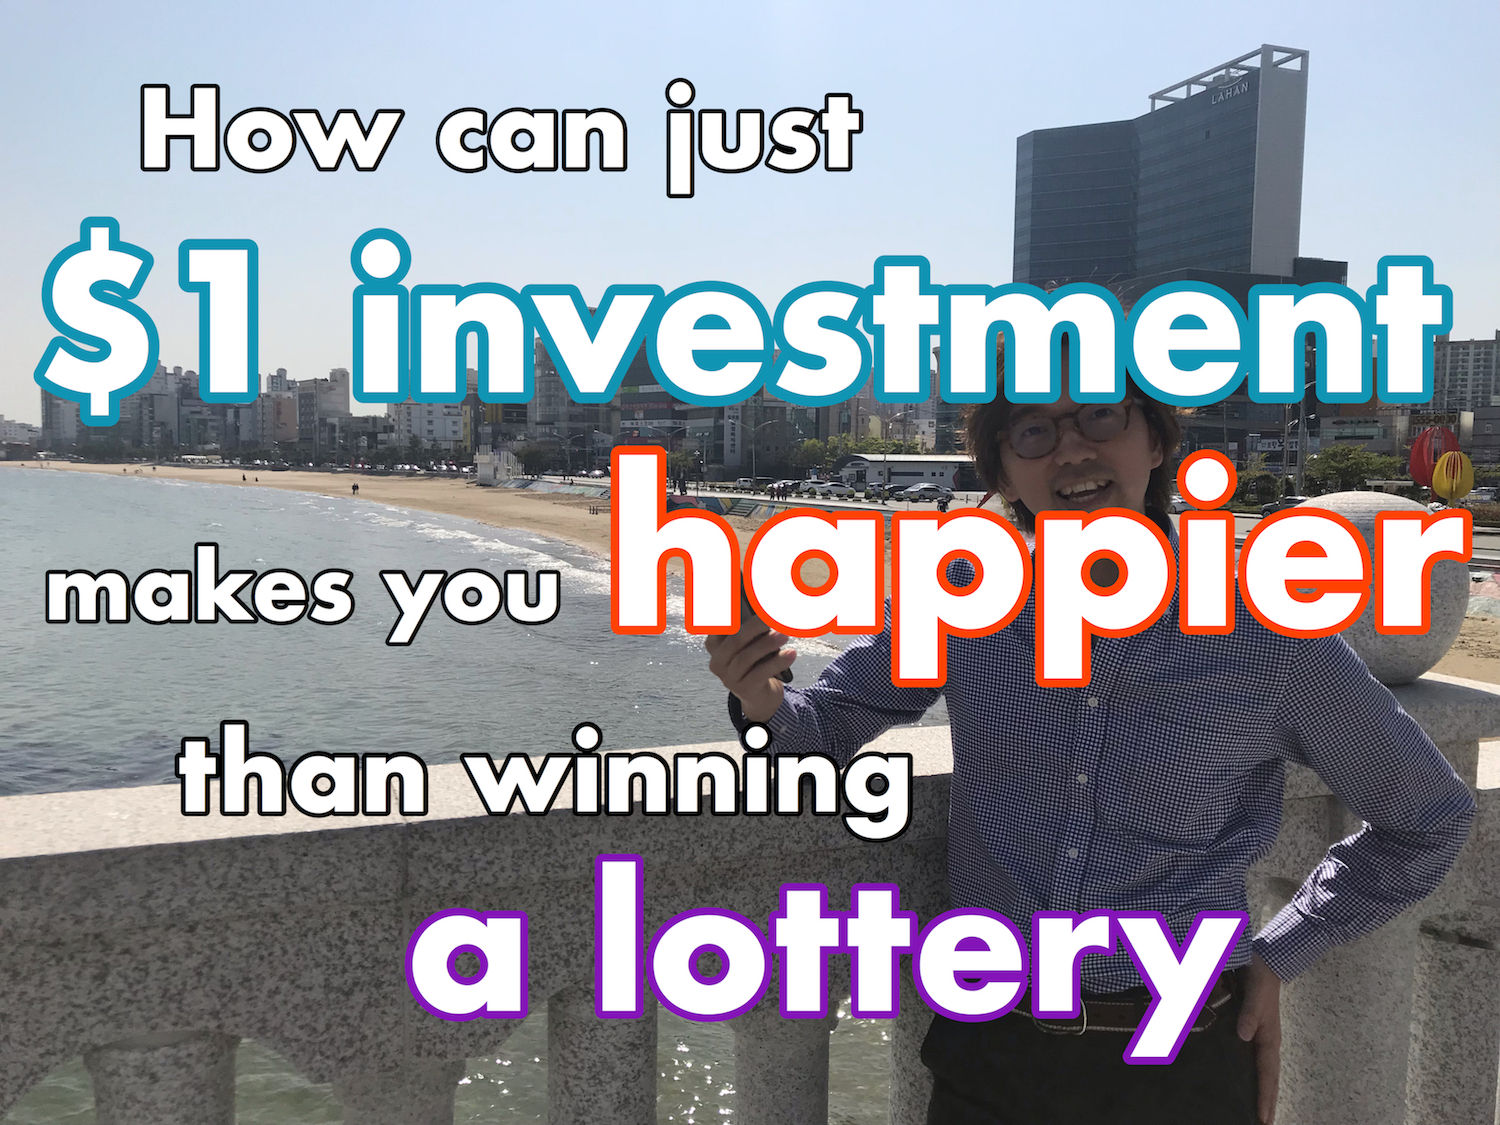 How can just $1 investment makes you happier than winning a lottery?